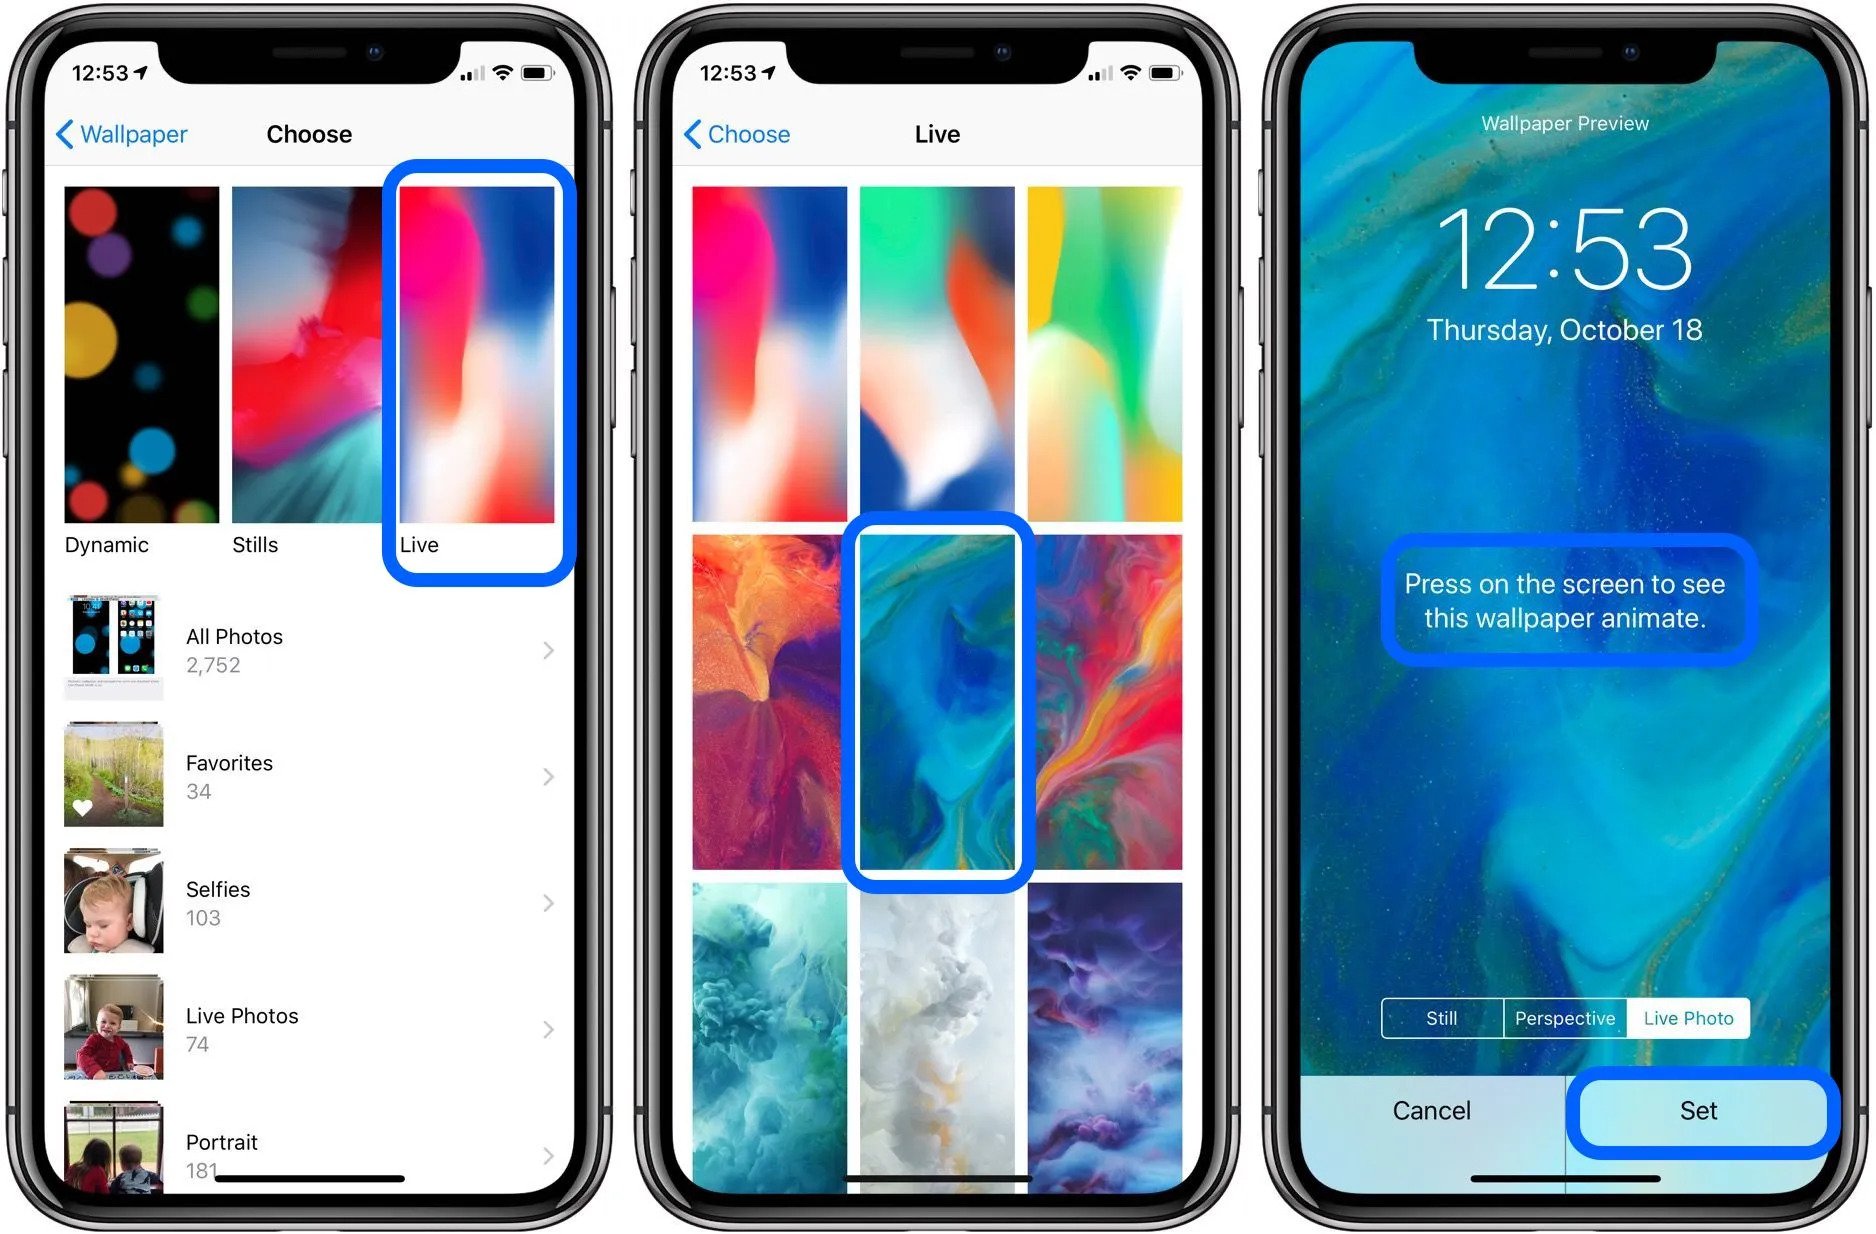 How to Make a Live Wallpaper on iPhone  Wallpaperscom Blog on Wallpapers